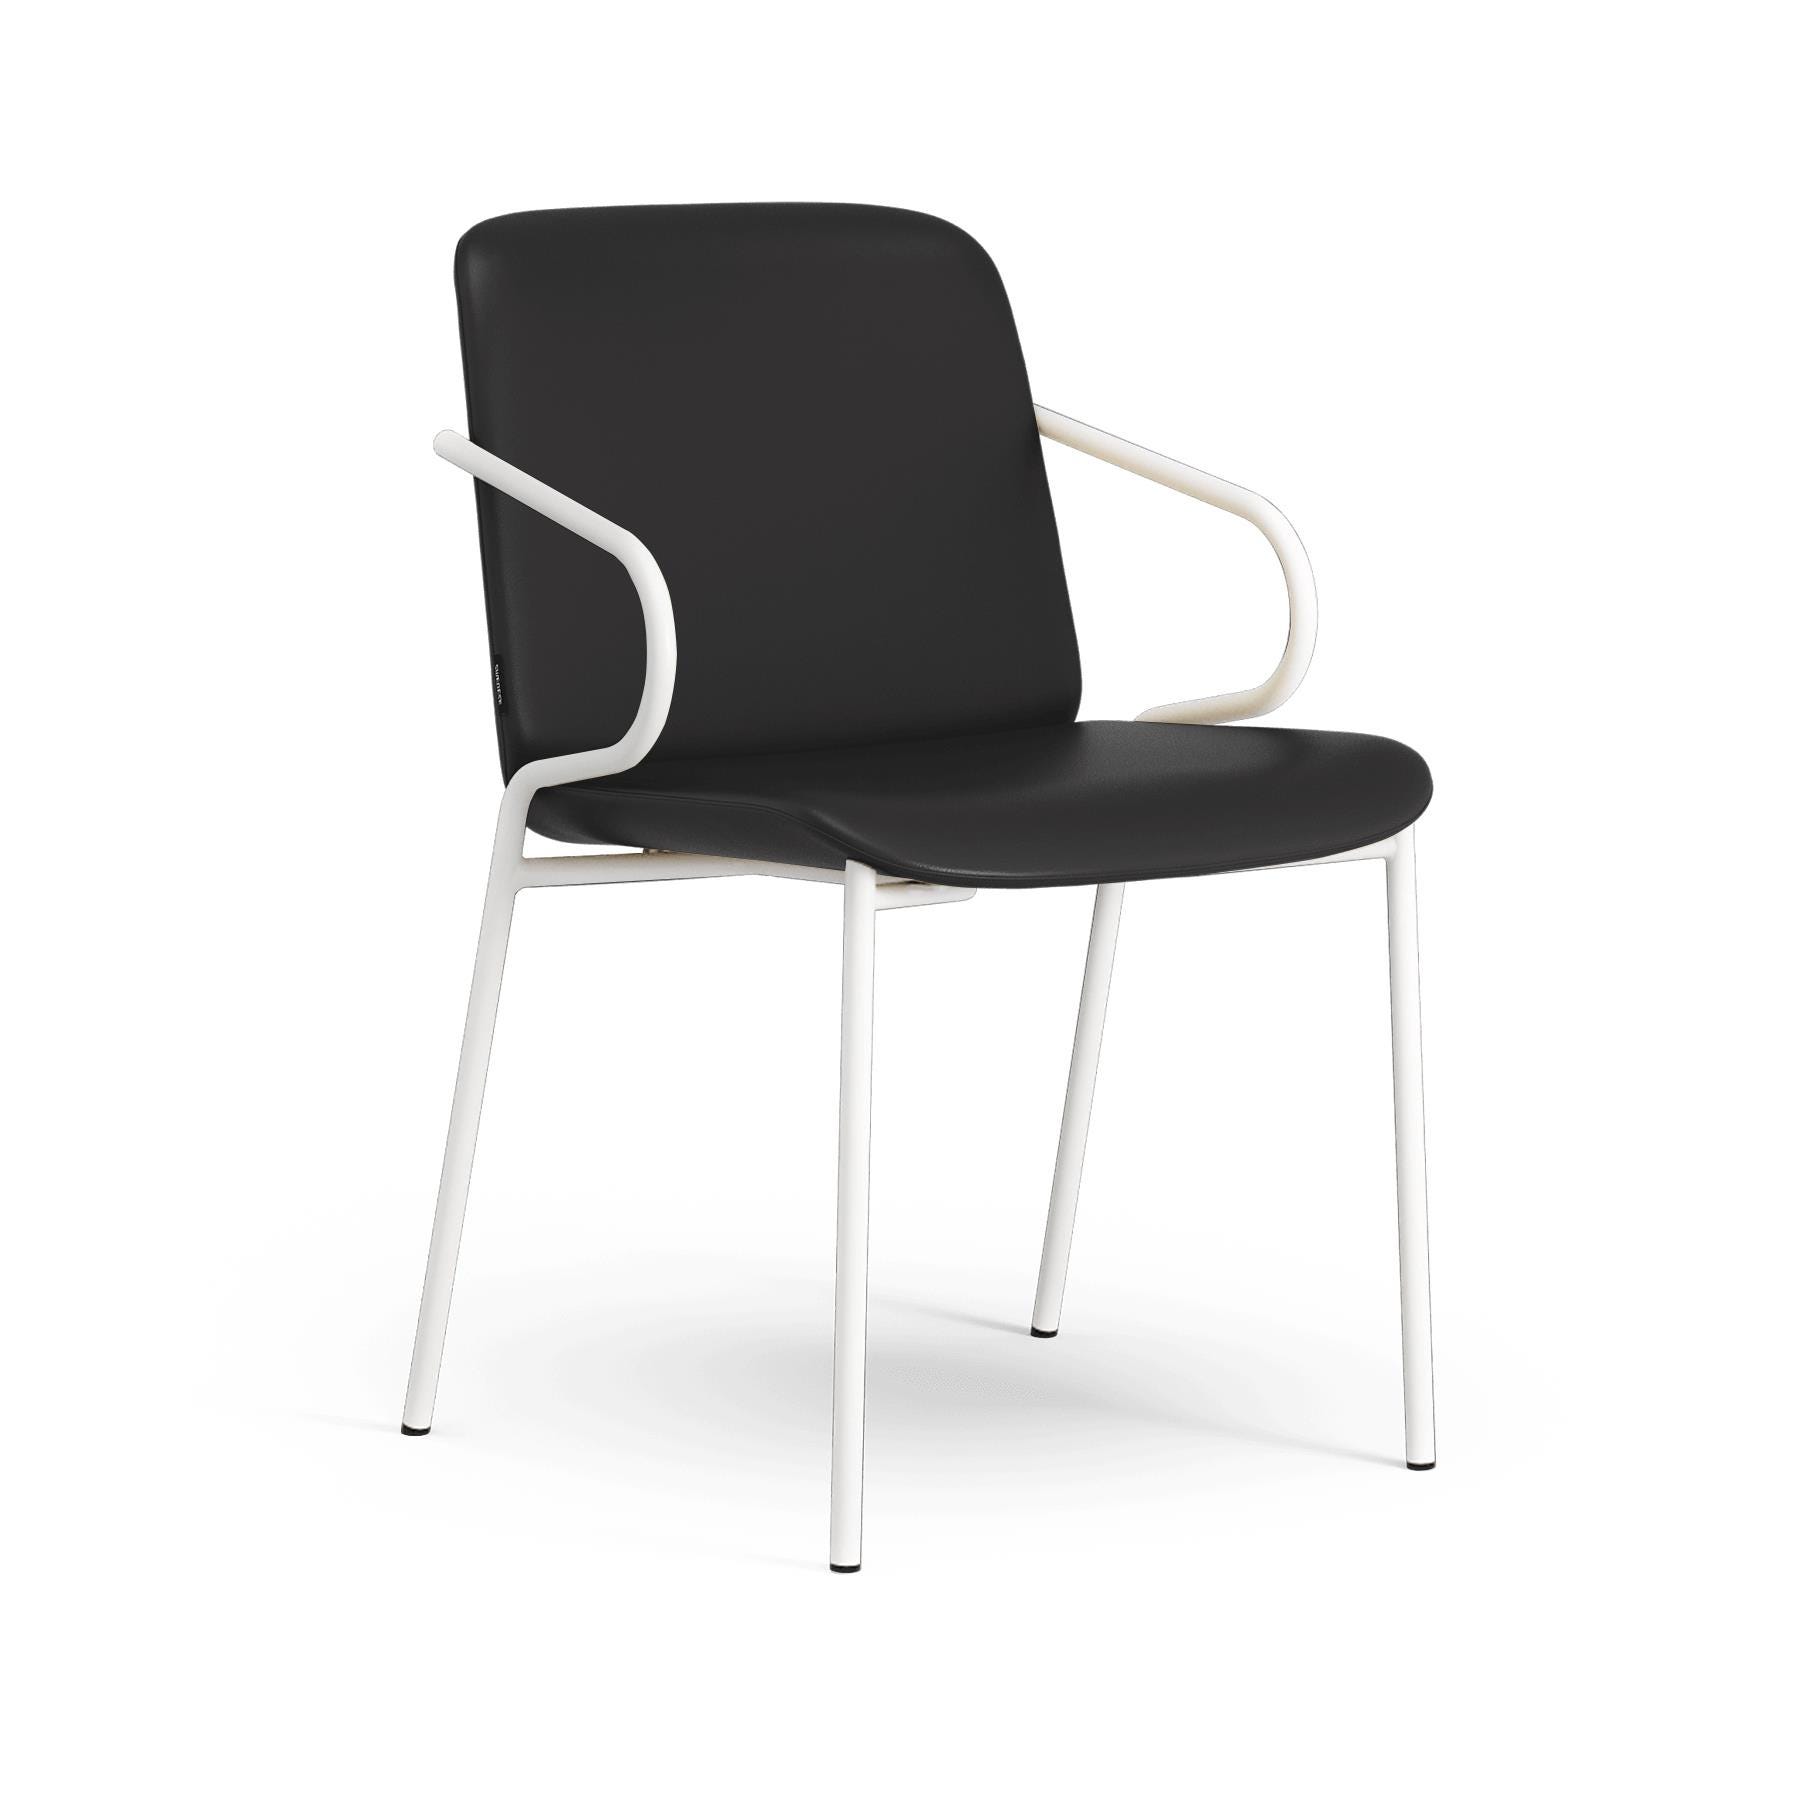 Swedese Amstelle Armchair Metal Frame White Steel Soft Black Leather Designer Furniture From Holloways Of Ludlow